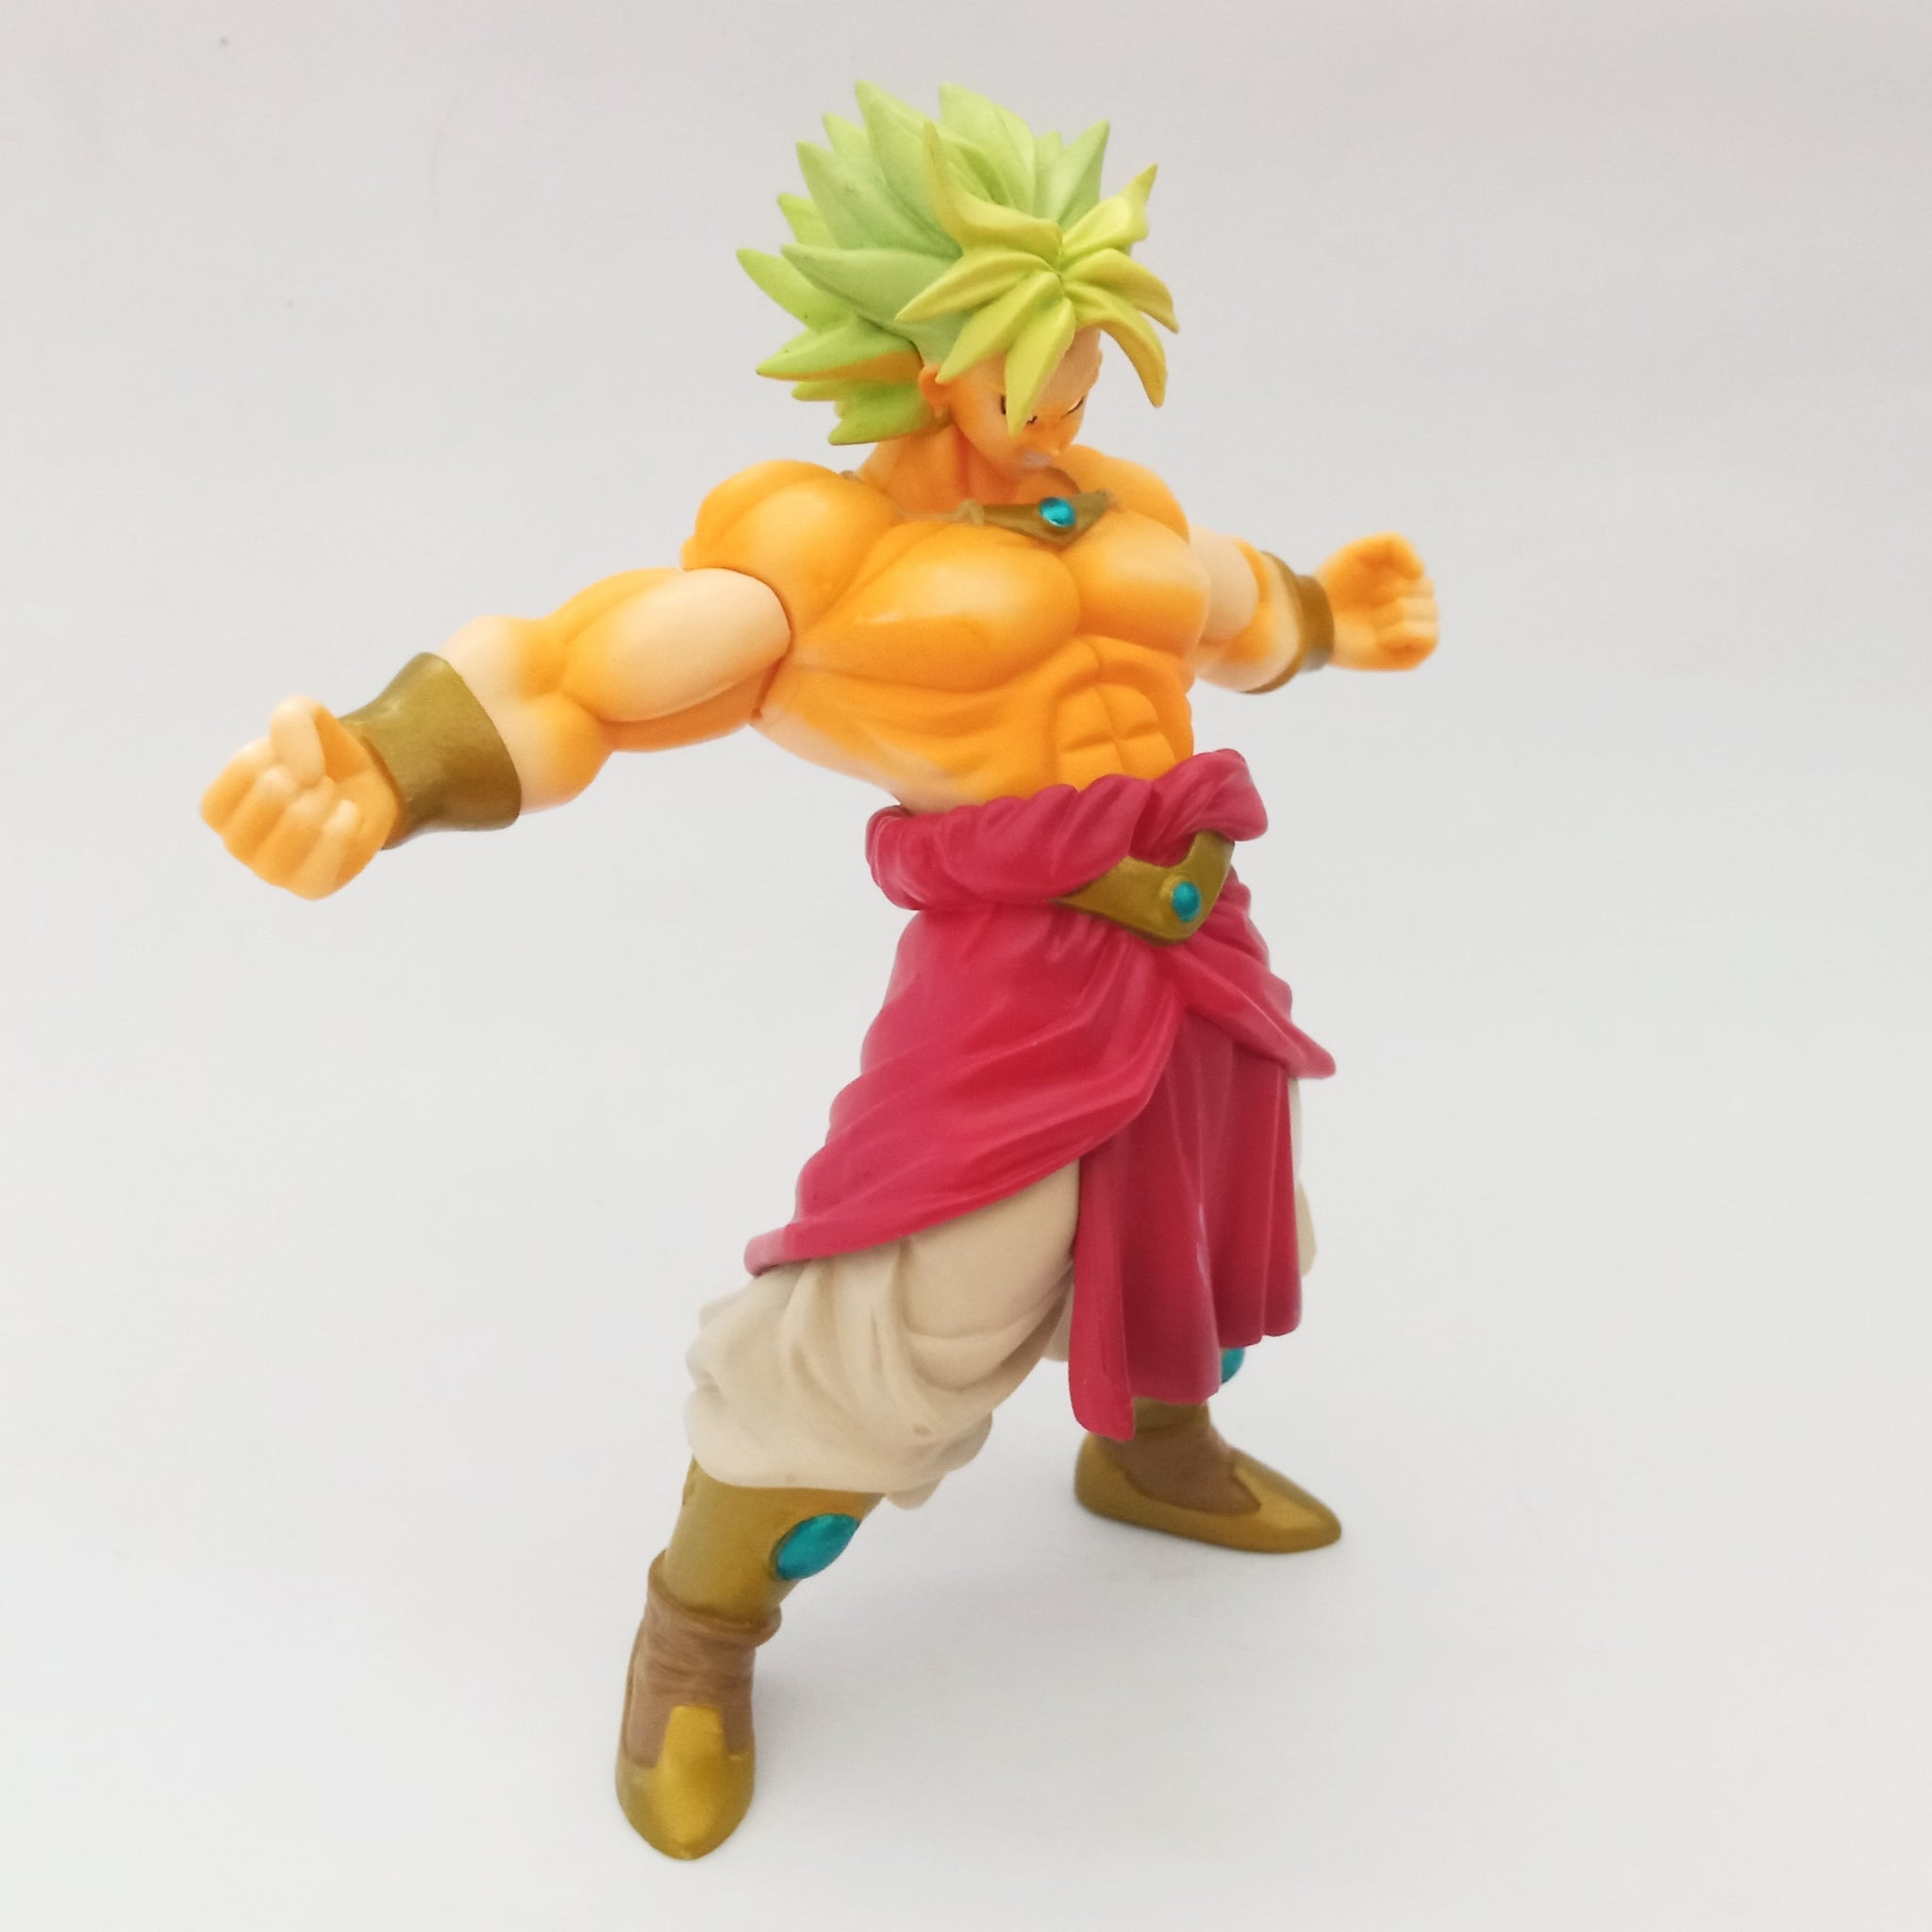 full action pose yadrat goku it exist it actually exist | DragonBall  Figures Toys Figuarts Collectibles Forum Dragon Ball Figures DB DBZ DBGT